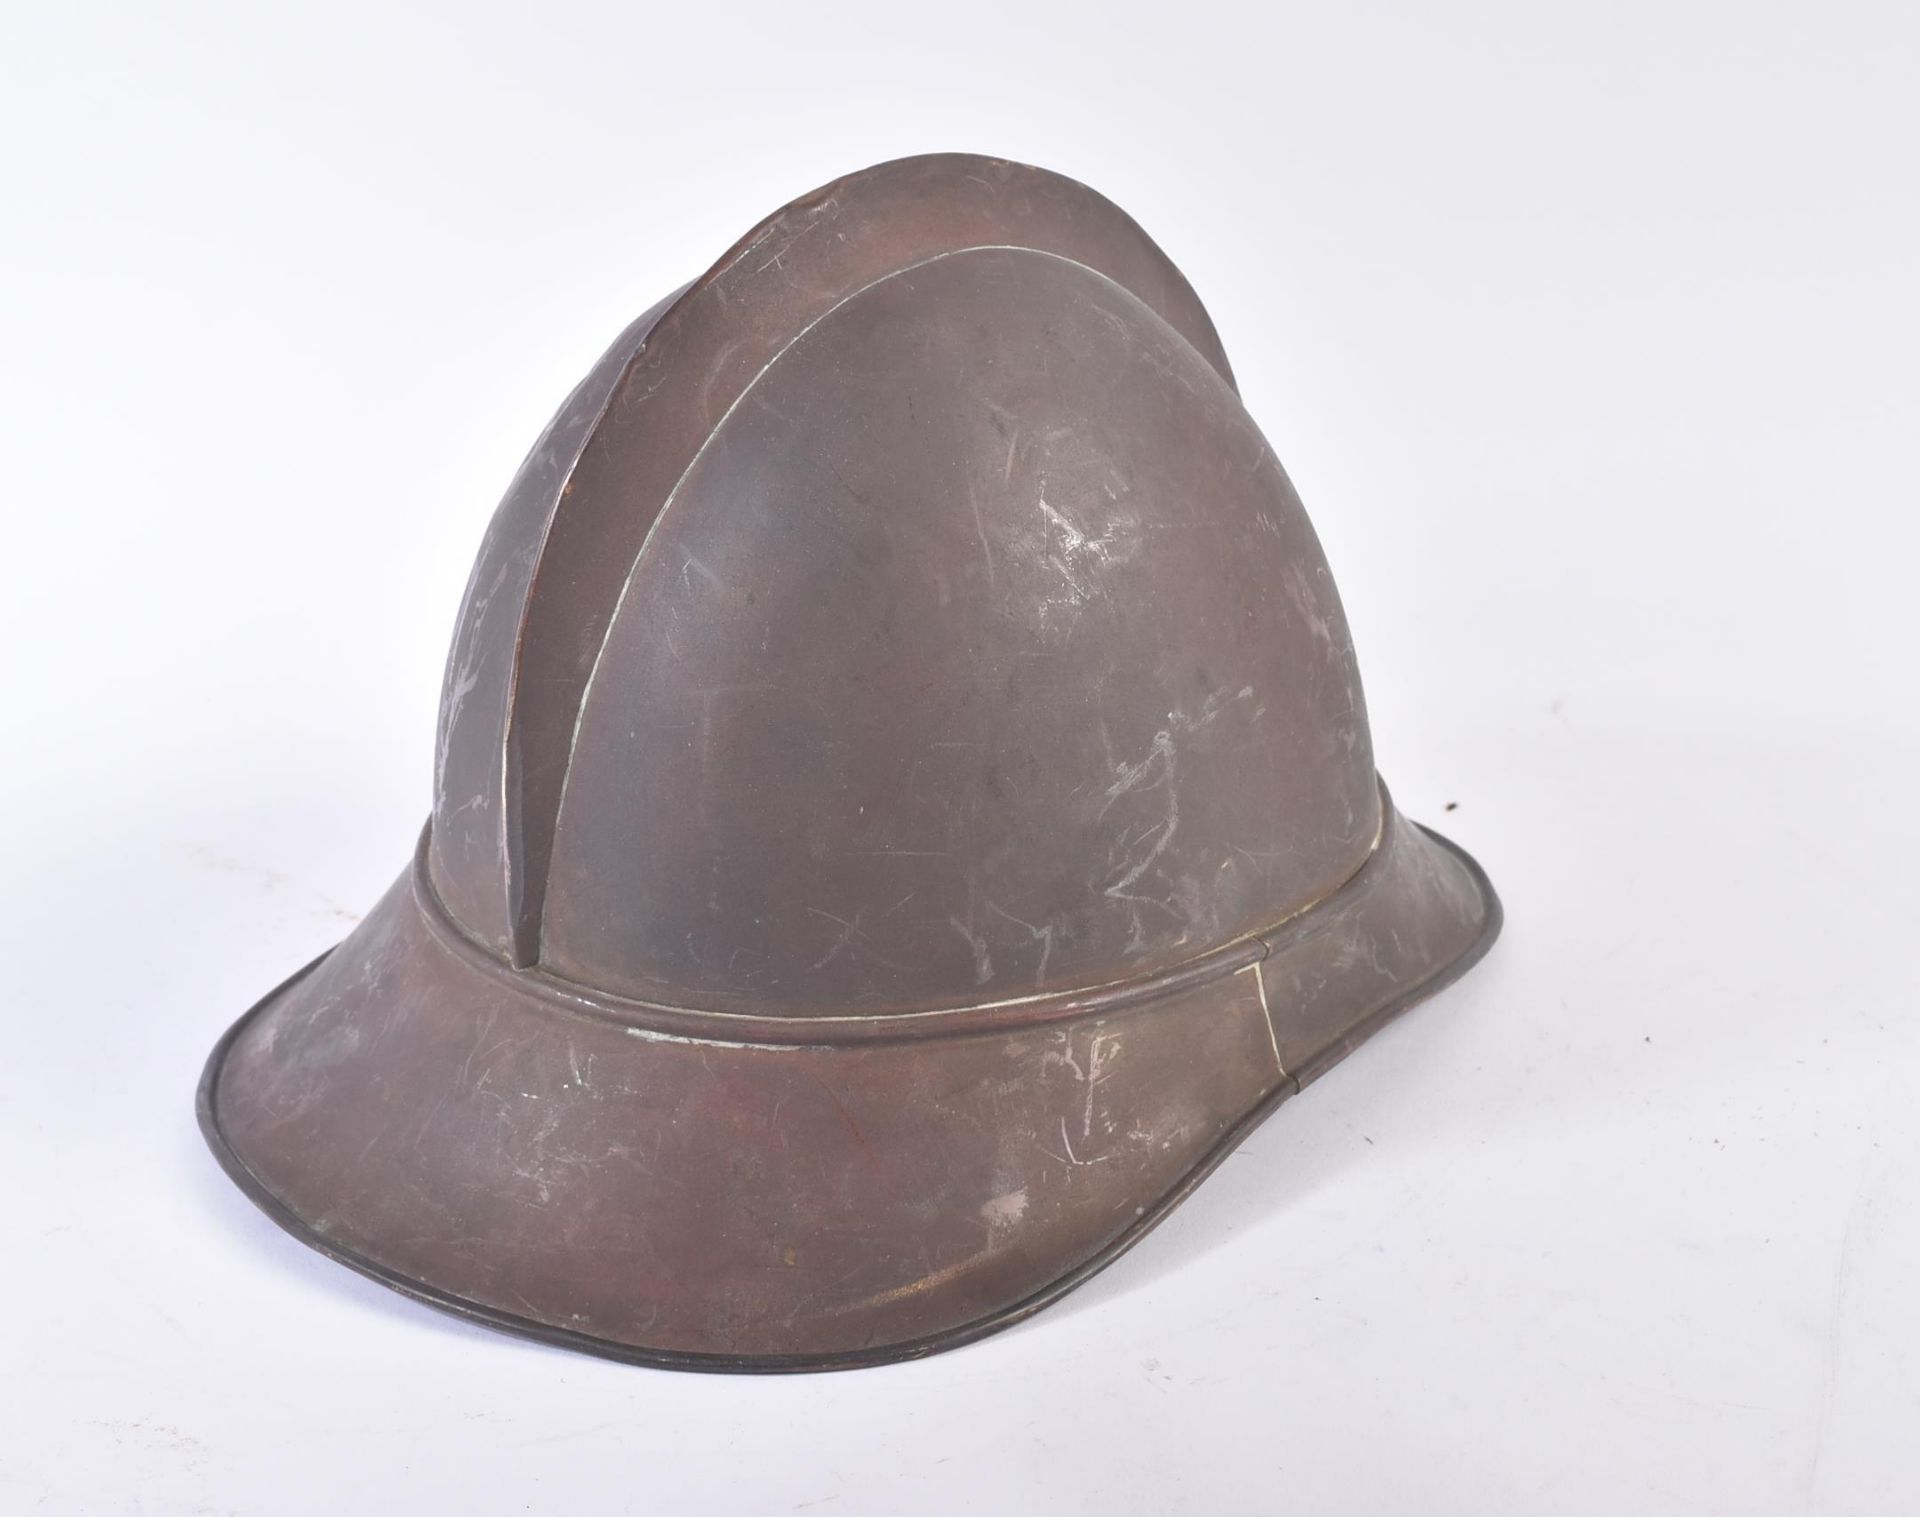 LATE 19TH CENTURY FRENCH ADRIAN HELMET - Image 4 of 6